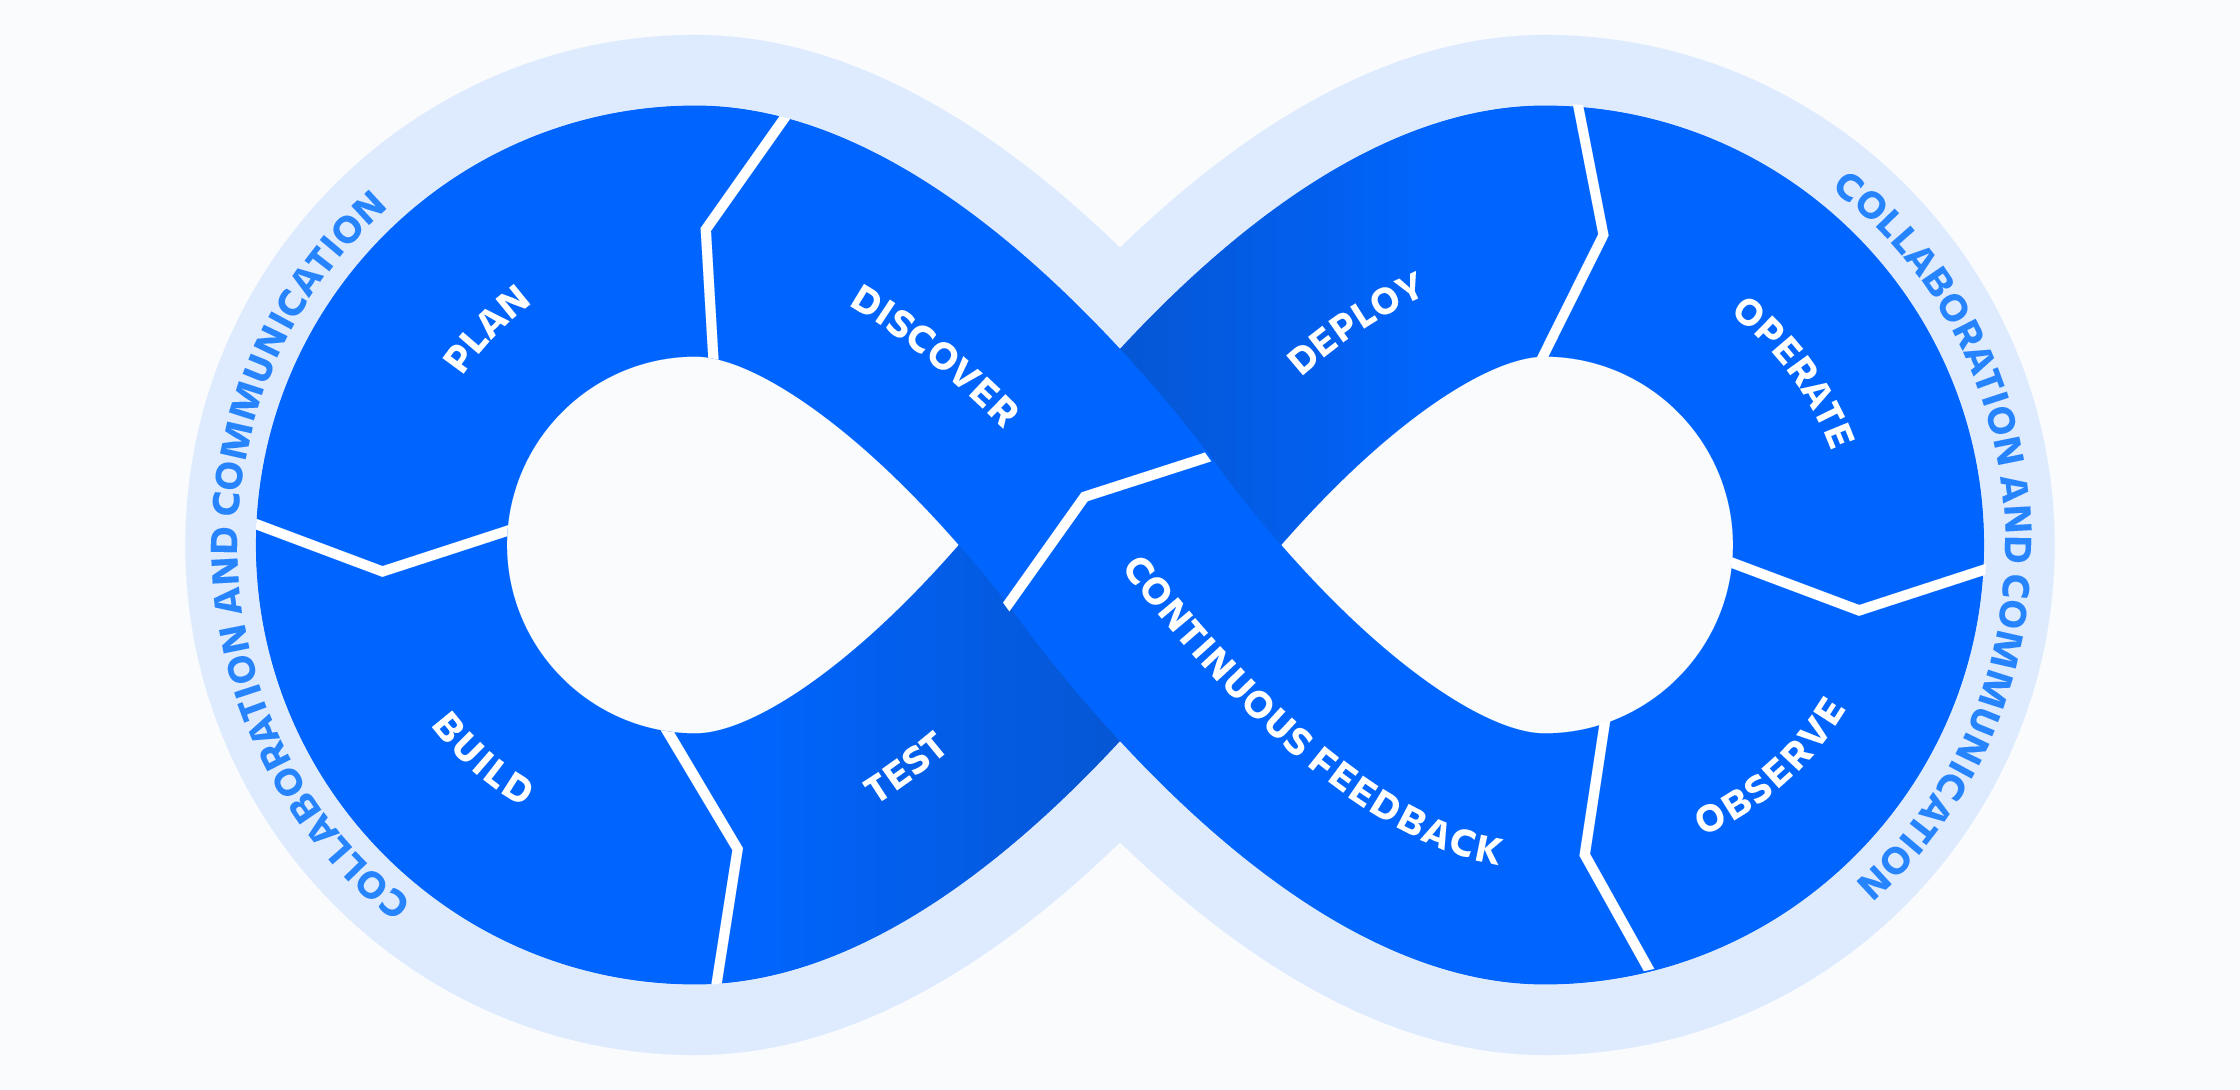 Image of the DevOps symbol, showcasing interconnected gears representing the essential components